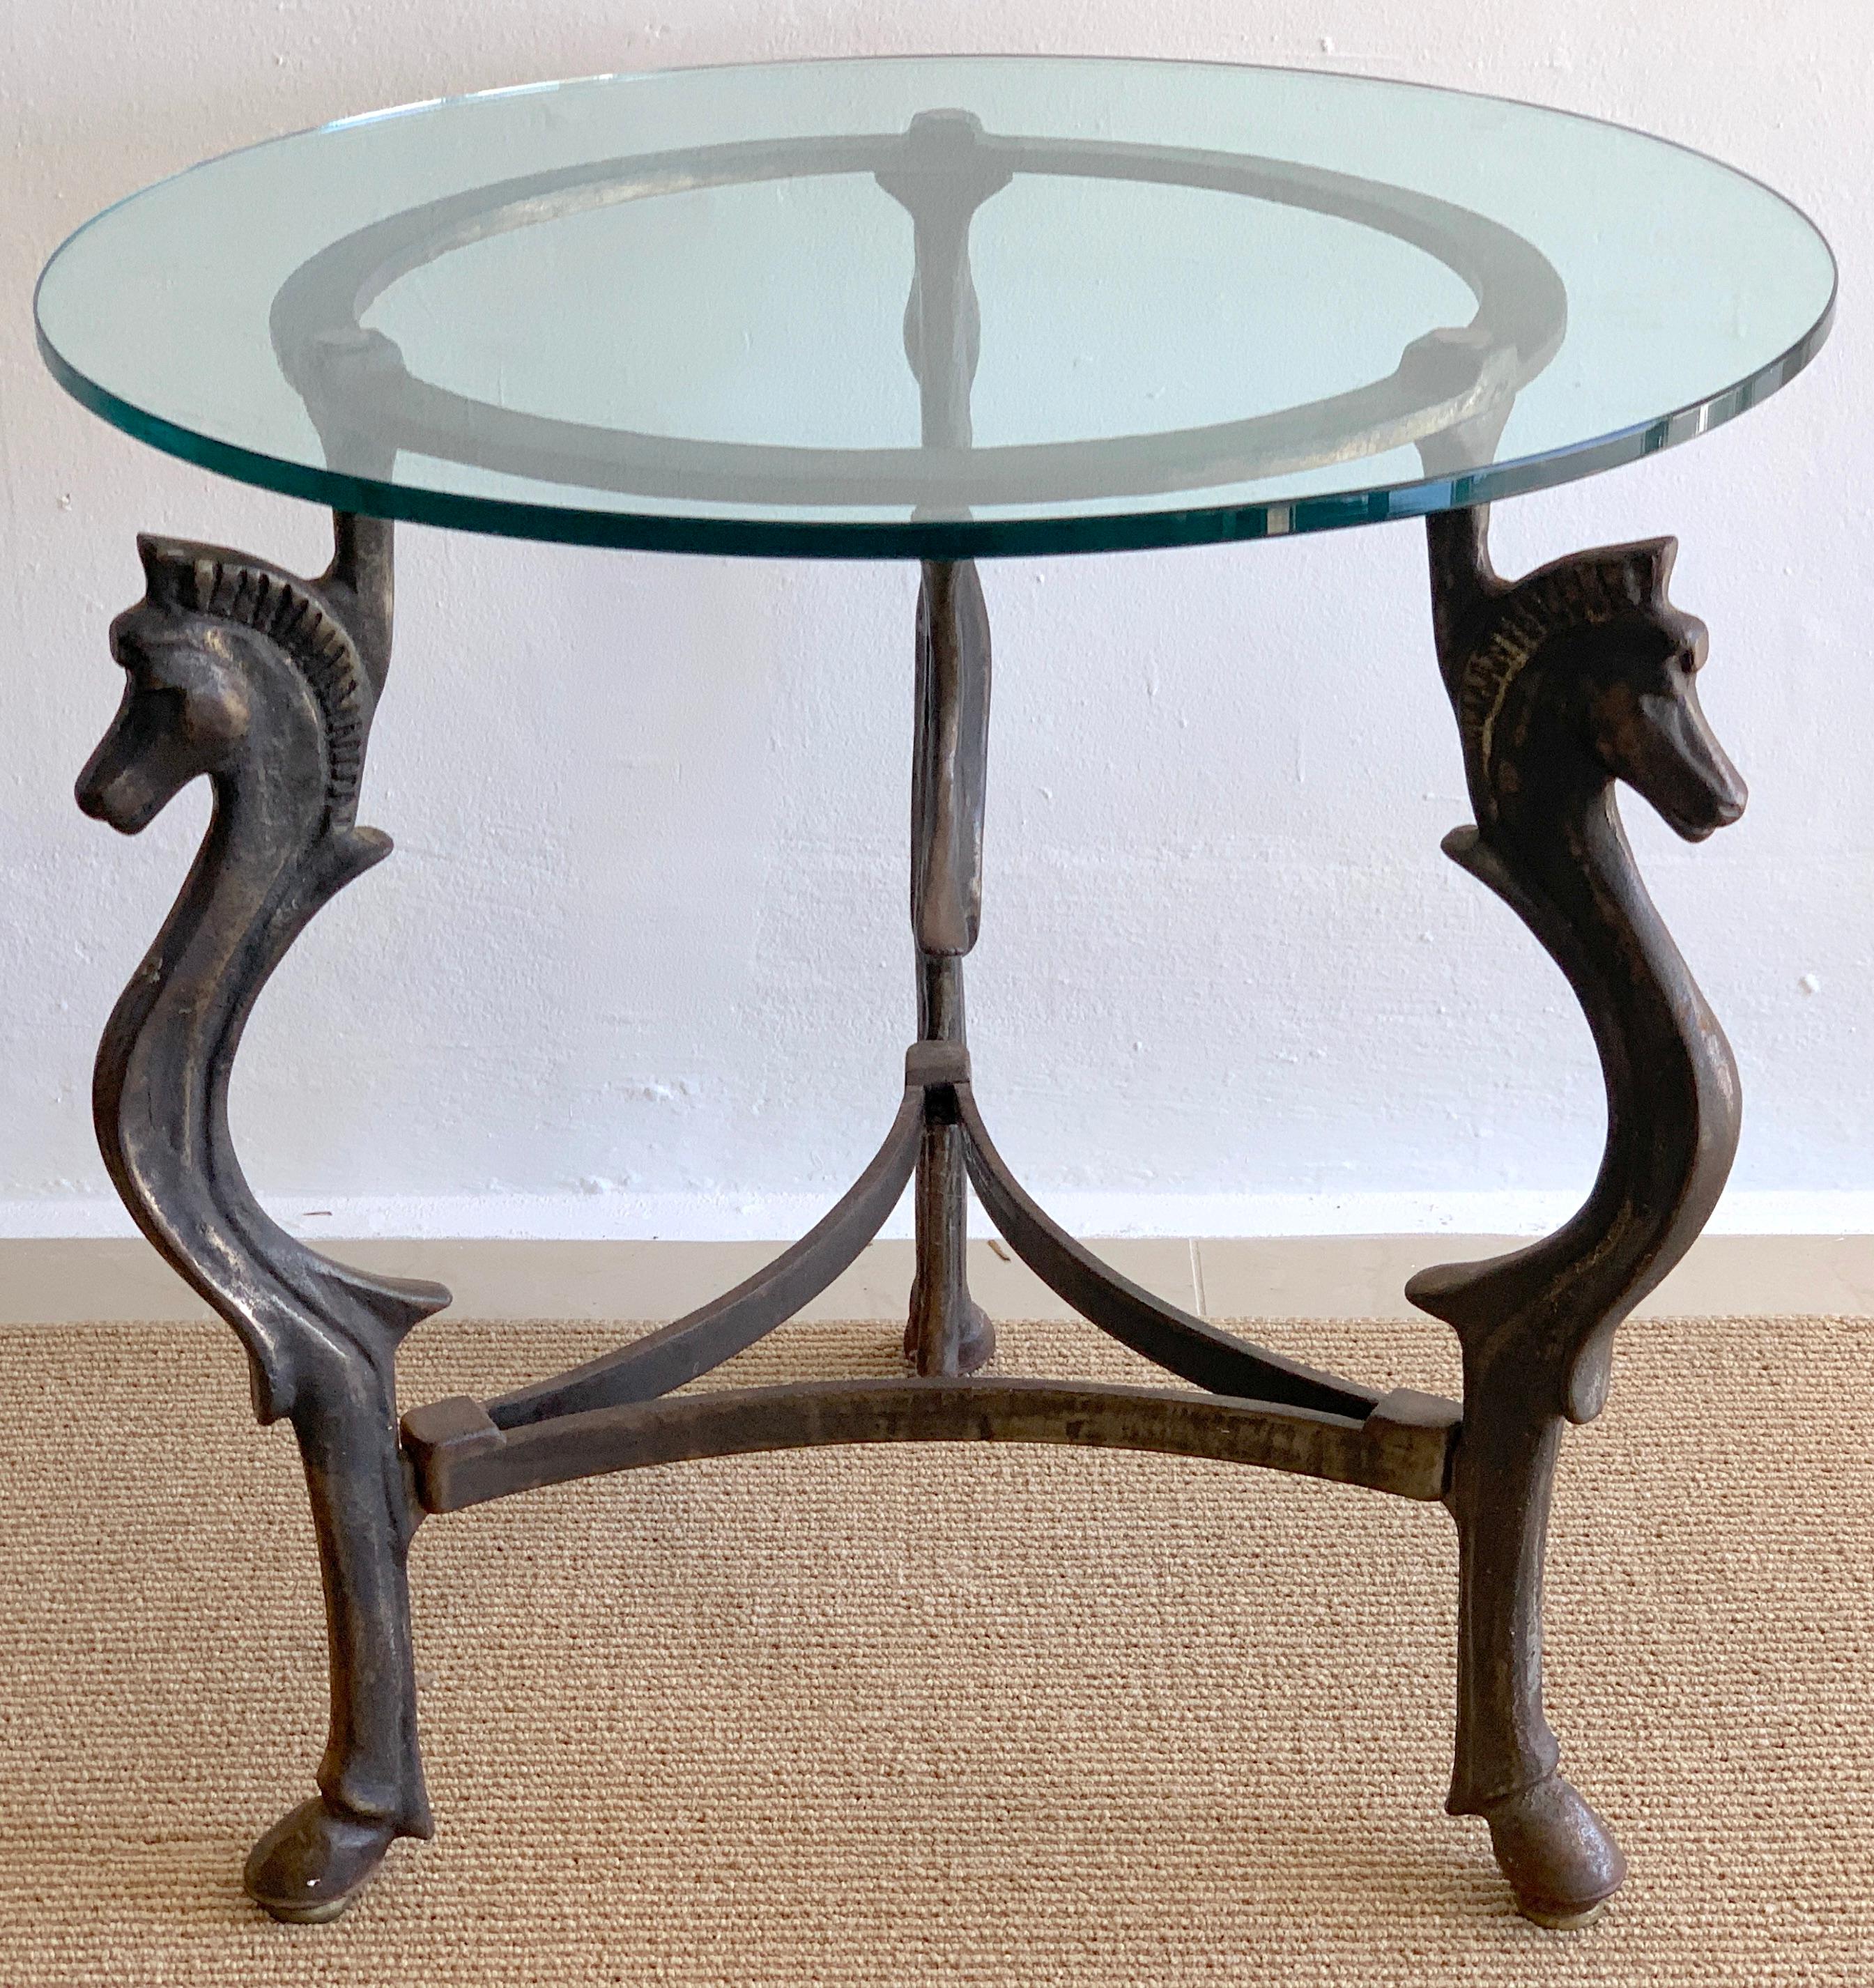 French modern iron horse motif side/end table, circa 1960
Fitted with 26